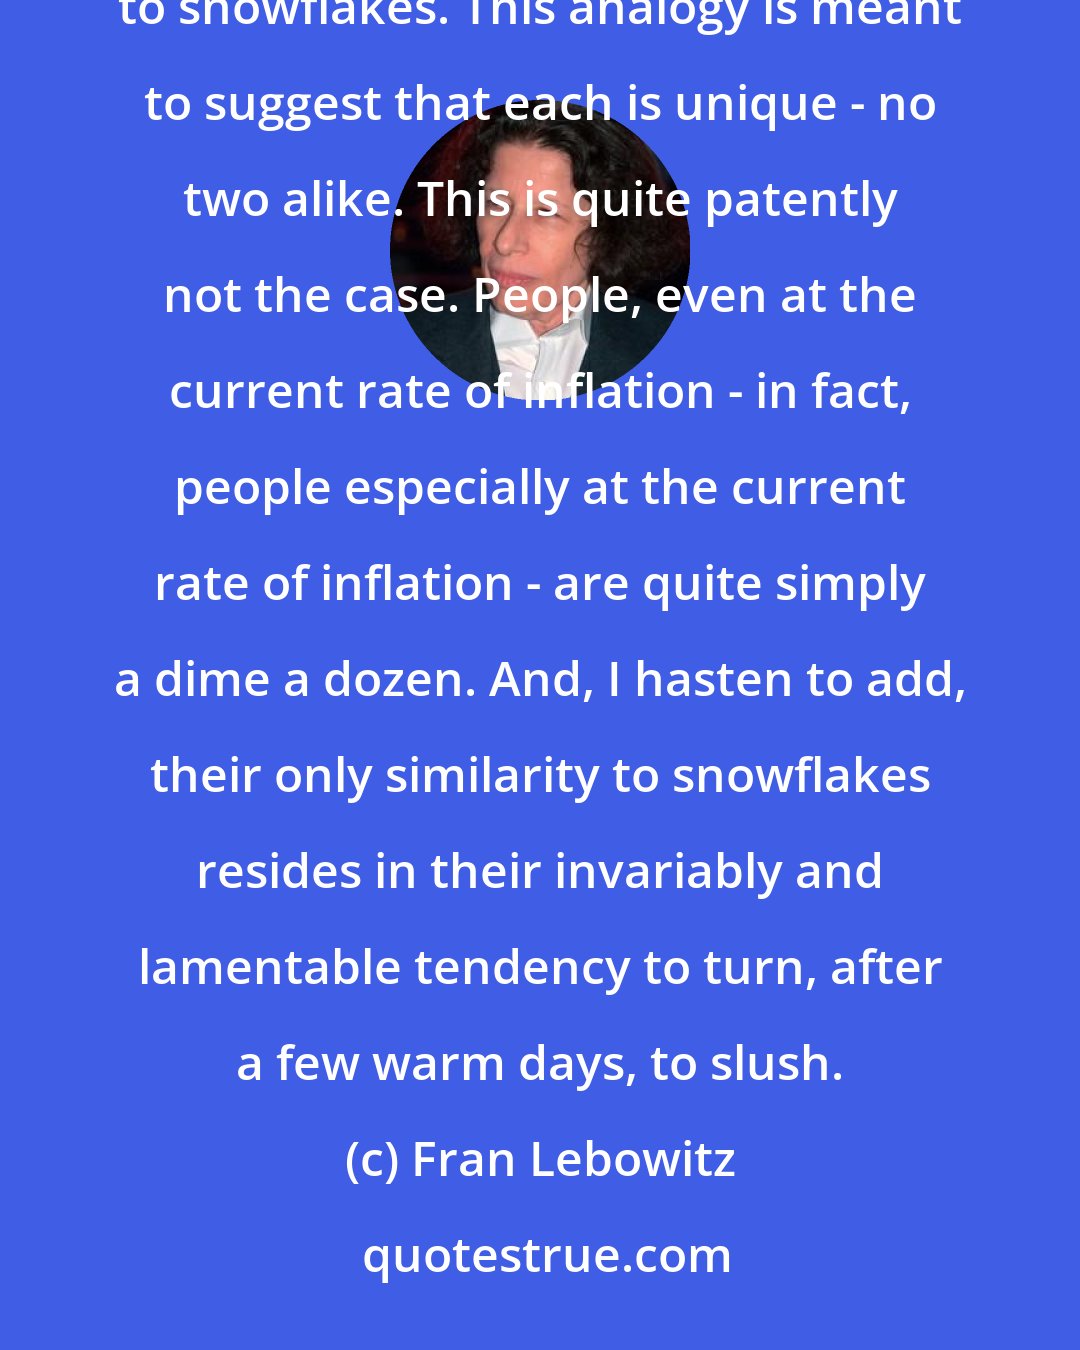 Fran Lebowitz: People (a group that in my opinion has always attracted an undue amount of attention) have often been likened to snowflakes. This analogy is meant to suggest that each is unique - no two alike. This is quite patently not the case. People, even at the current rate of inflation - in fact, people especially at the current rate of inflation - are quite simply a dime a dozen. And, I hasten to add, their only similarity to snowflakes resides in their invariably and lamentable tendency to turn, after a few warm days, to slush.